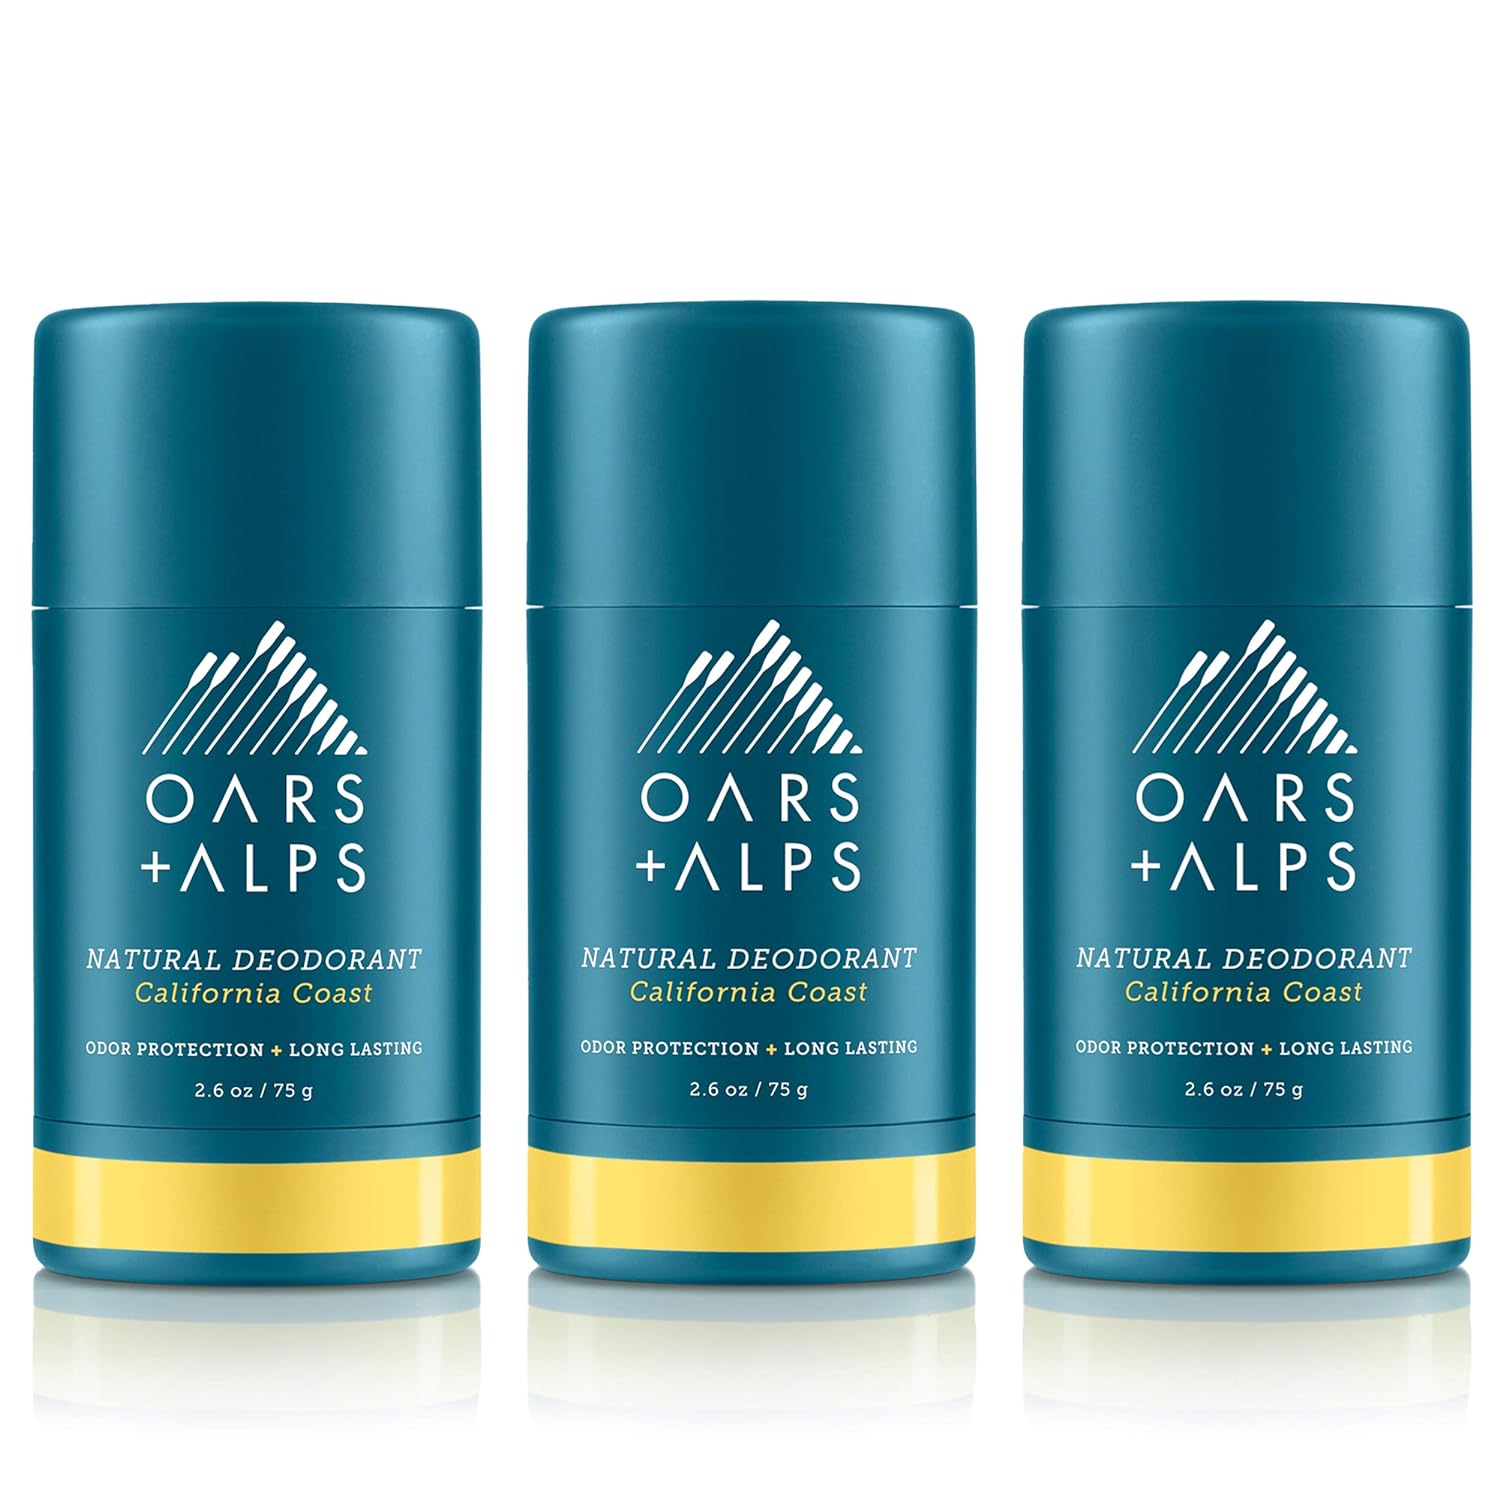 Oars + Alps Aluminum Free Deodorant for Men and Women, Dermatologist Tested and Made with Clean Ingredients, Travel Size, California Coast, 3 Pack, 2.6 Oz Each